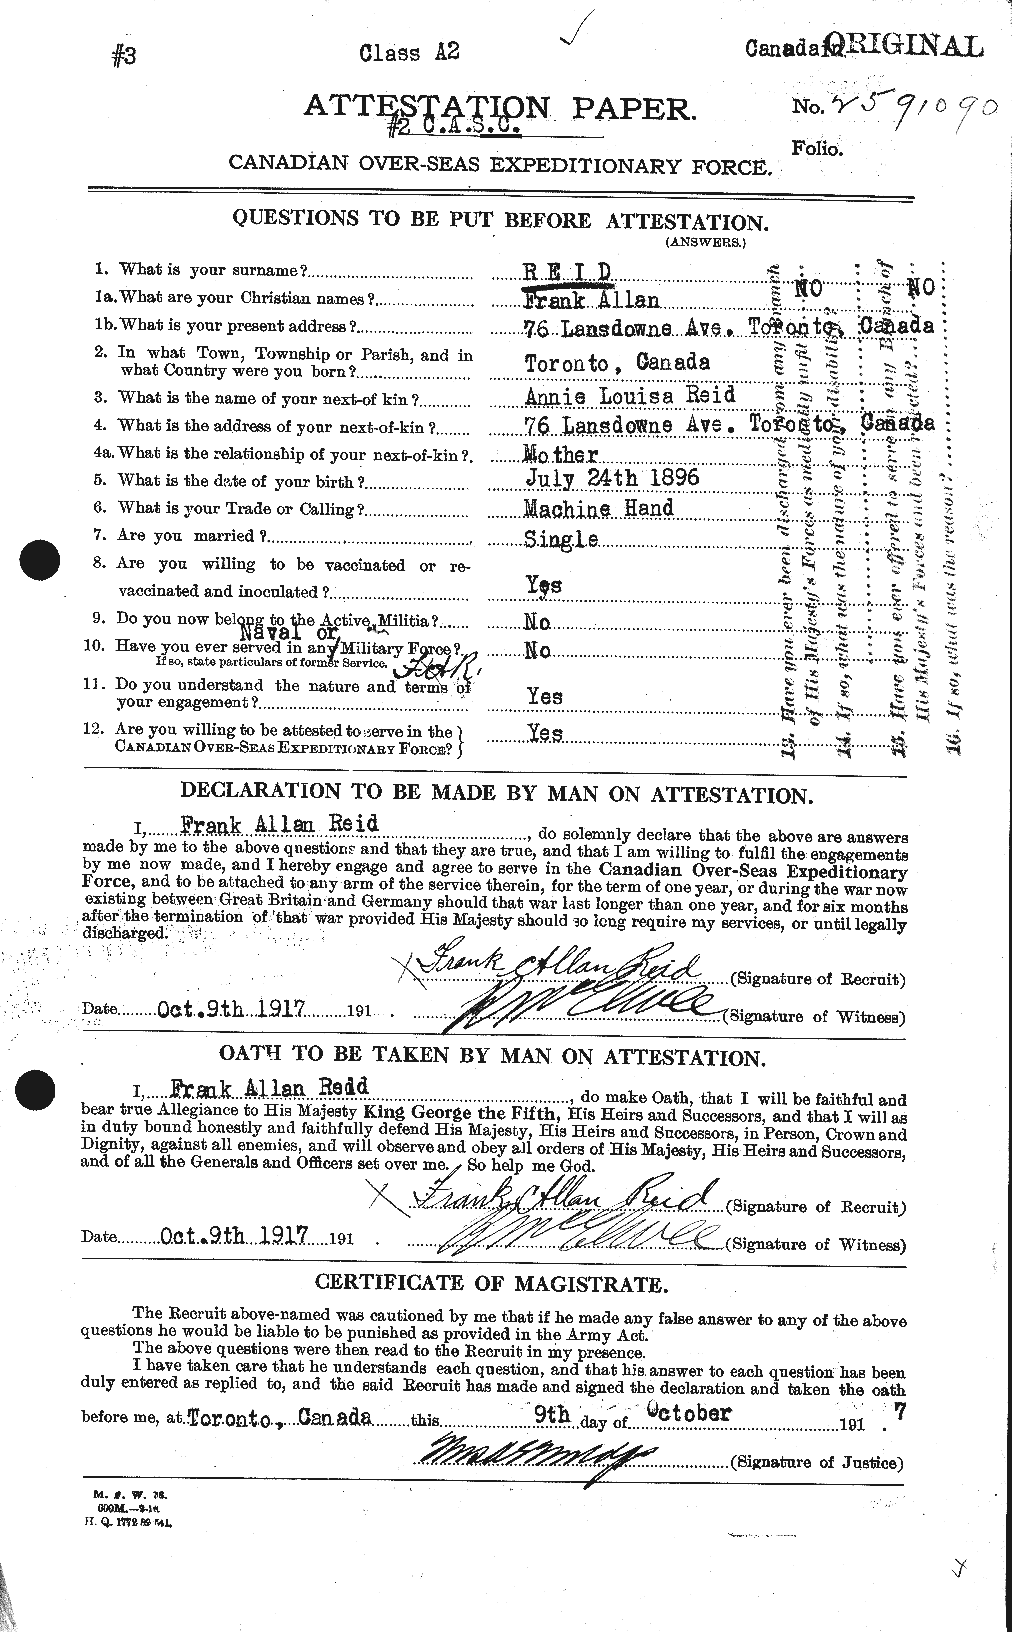 Personnel Records of the First World War - CEF 598046a